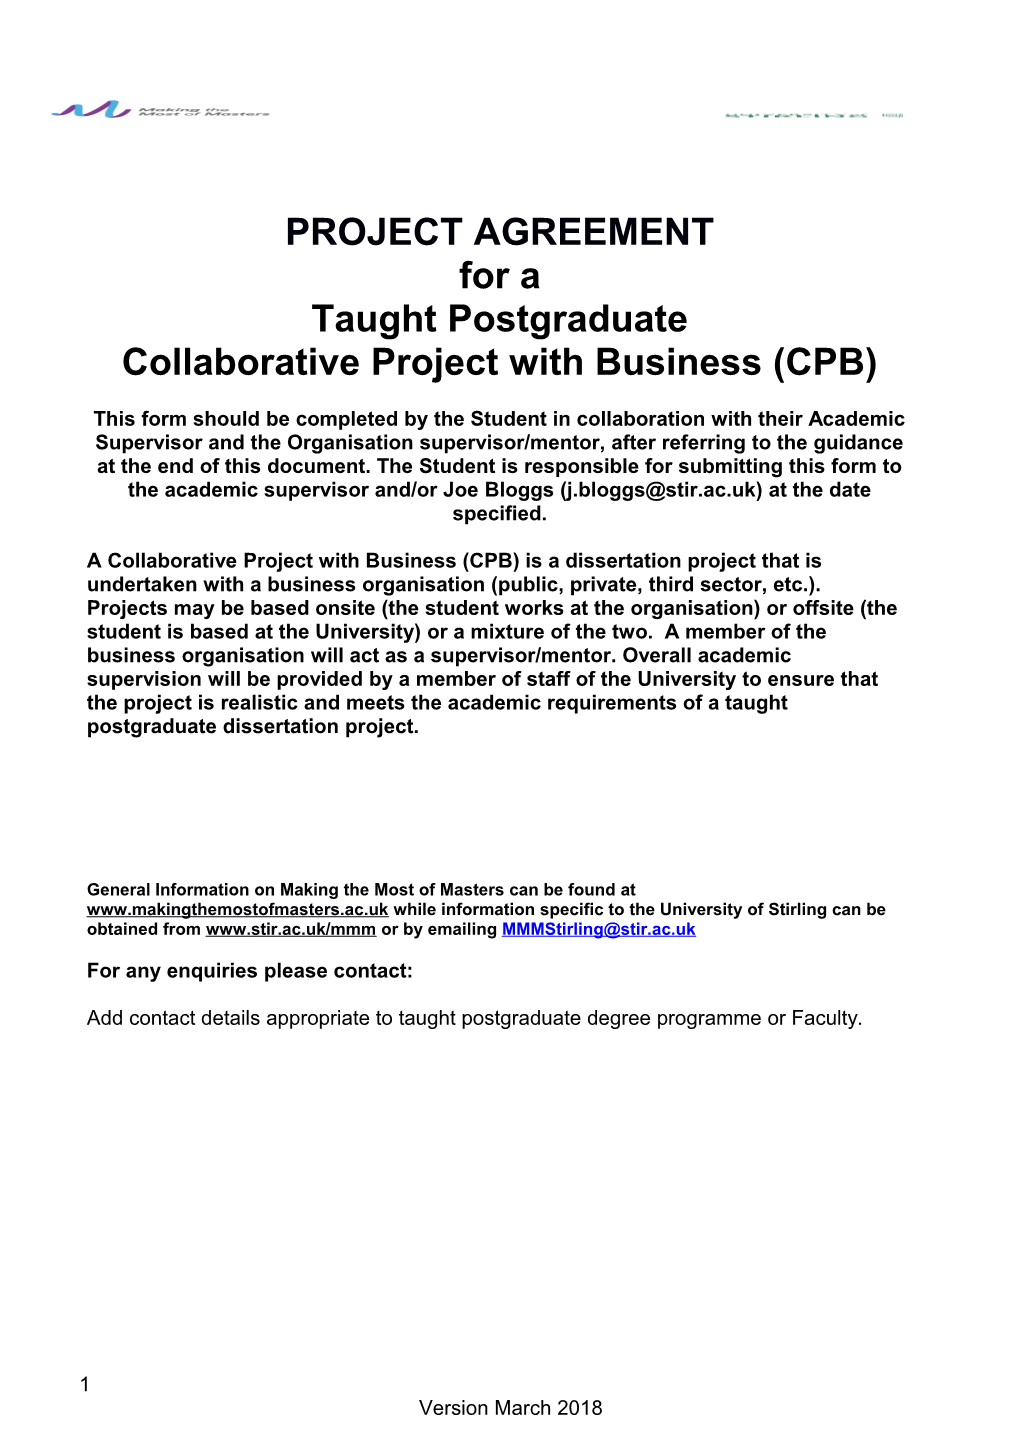 Collaborative Project with Business (CPB)